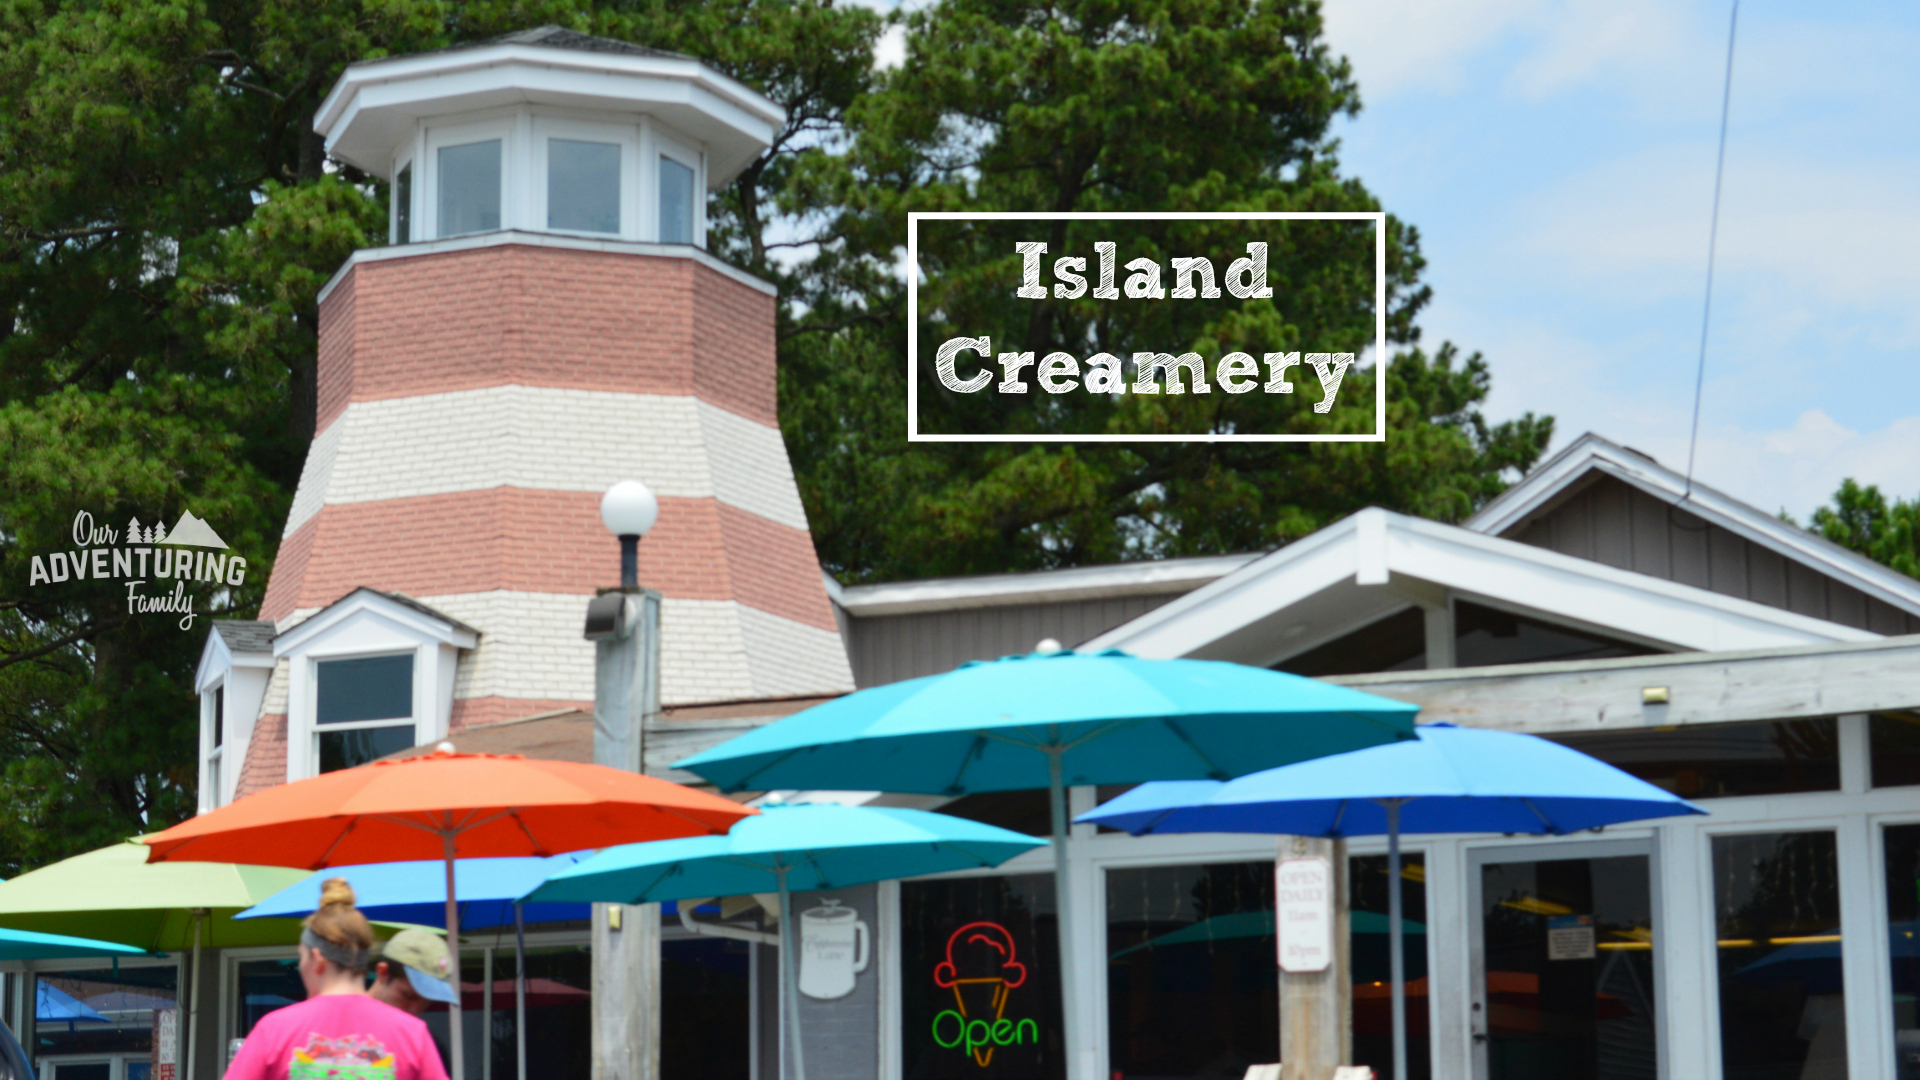 Planning a trip to the Eastern Shore of Virginia? Here's some ideas for more family fun in Chincoteague and Assateague. Find them at ouradventuringfamily.com and add them to your itinerary!